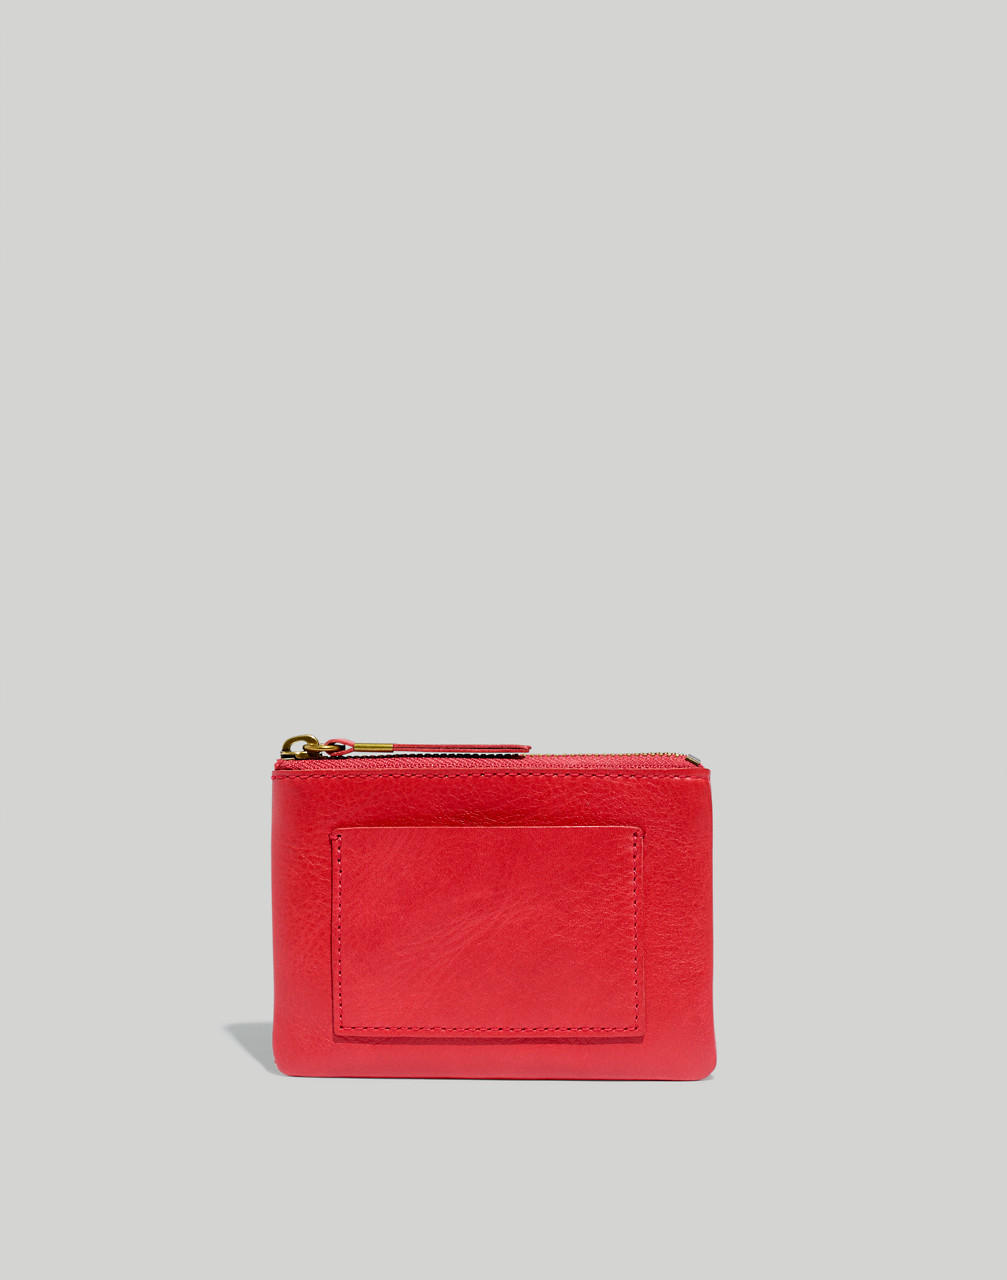 Mw The Leather Pocket Pouch Wallet In Scarlet